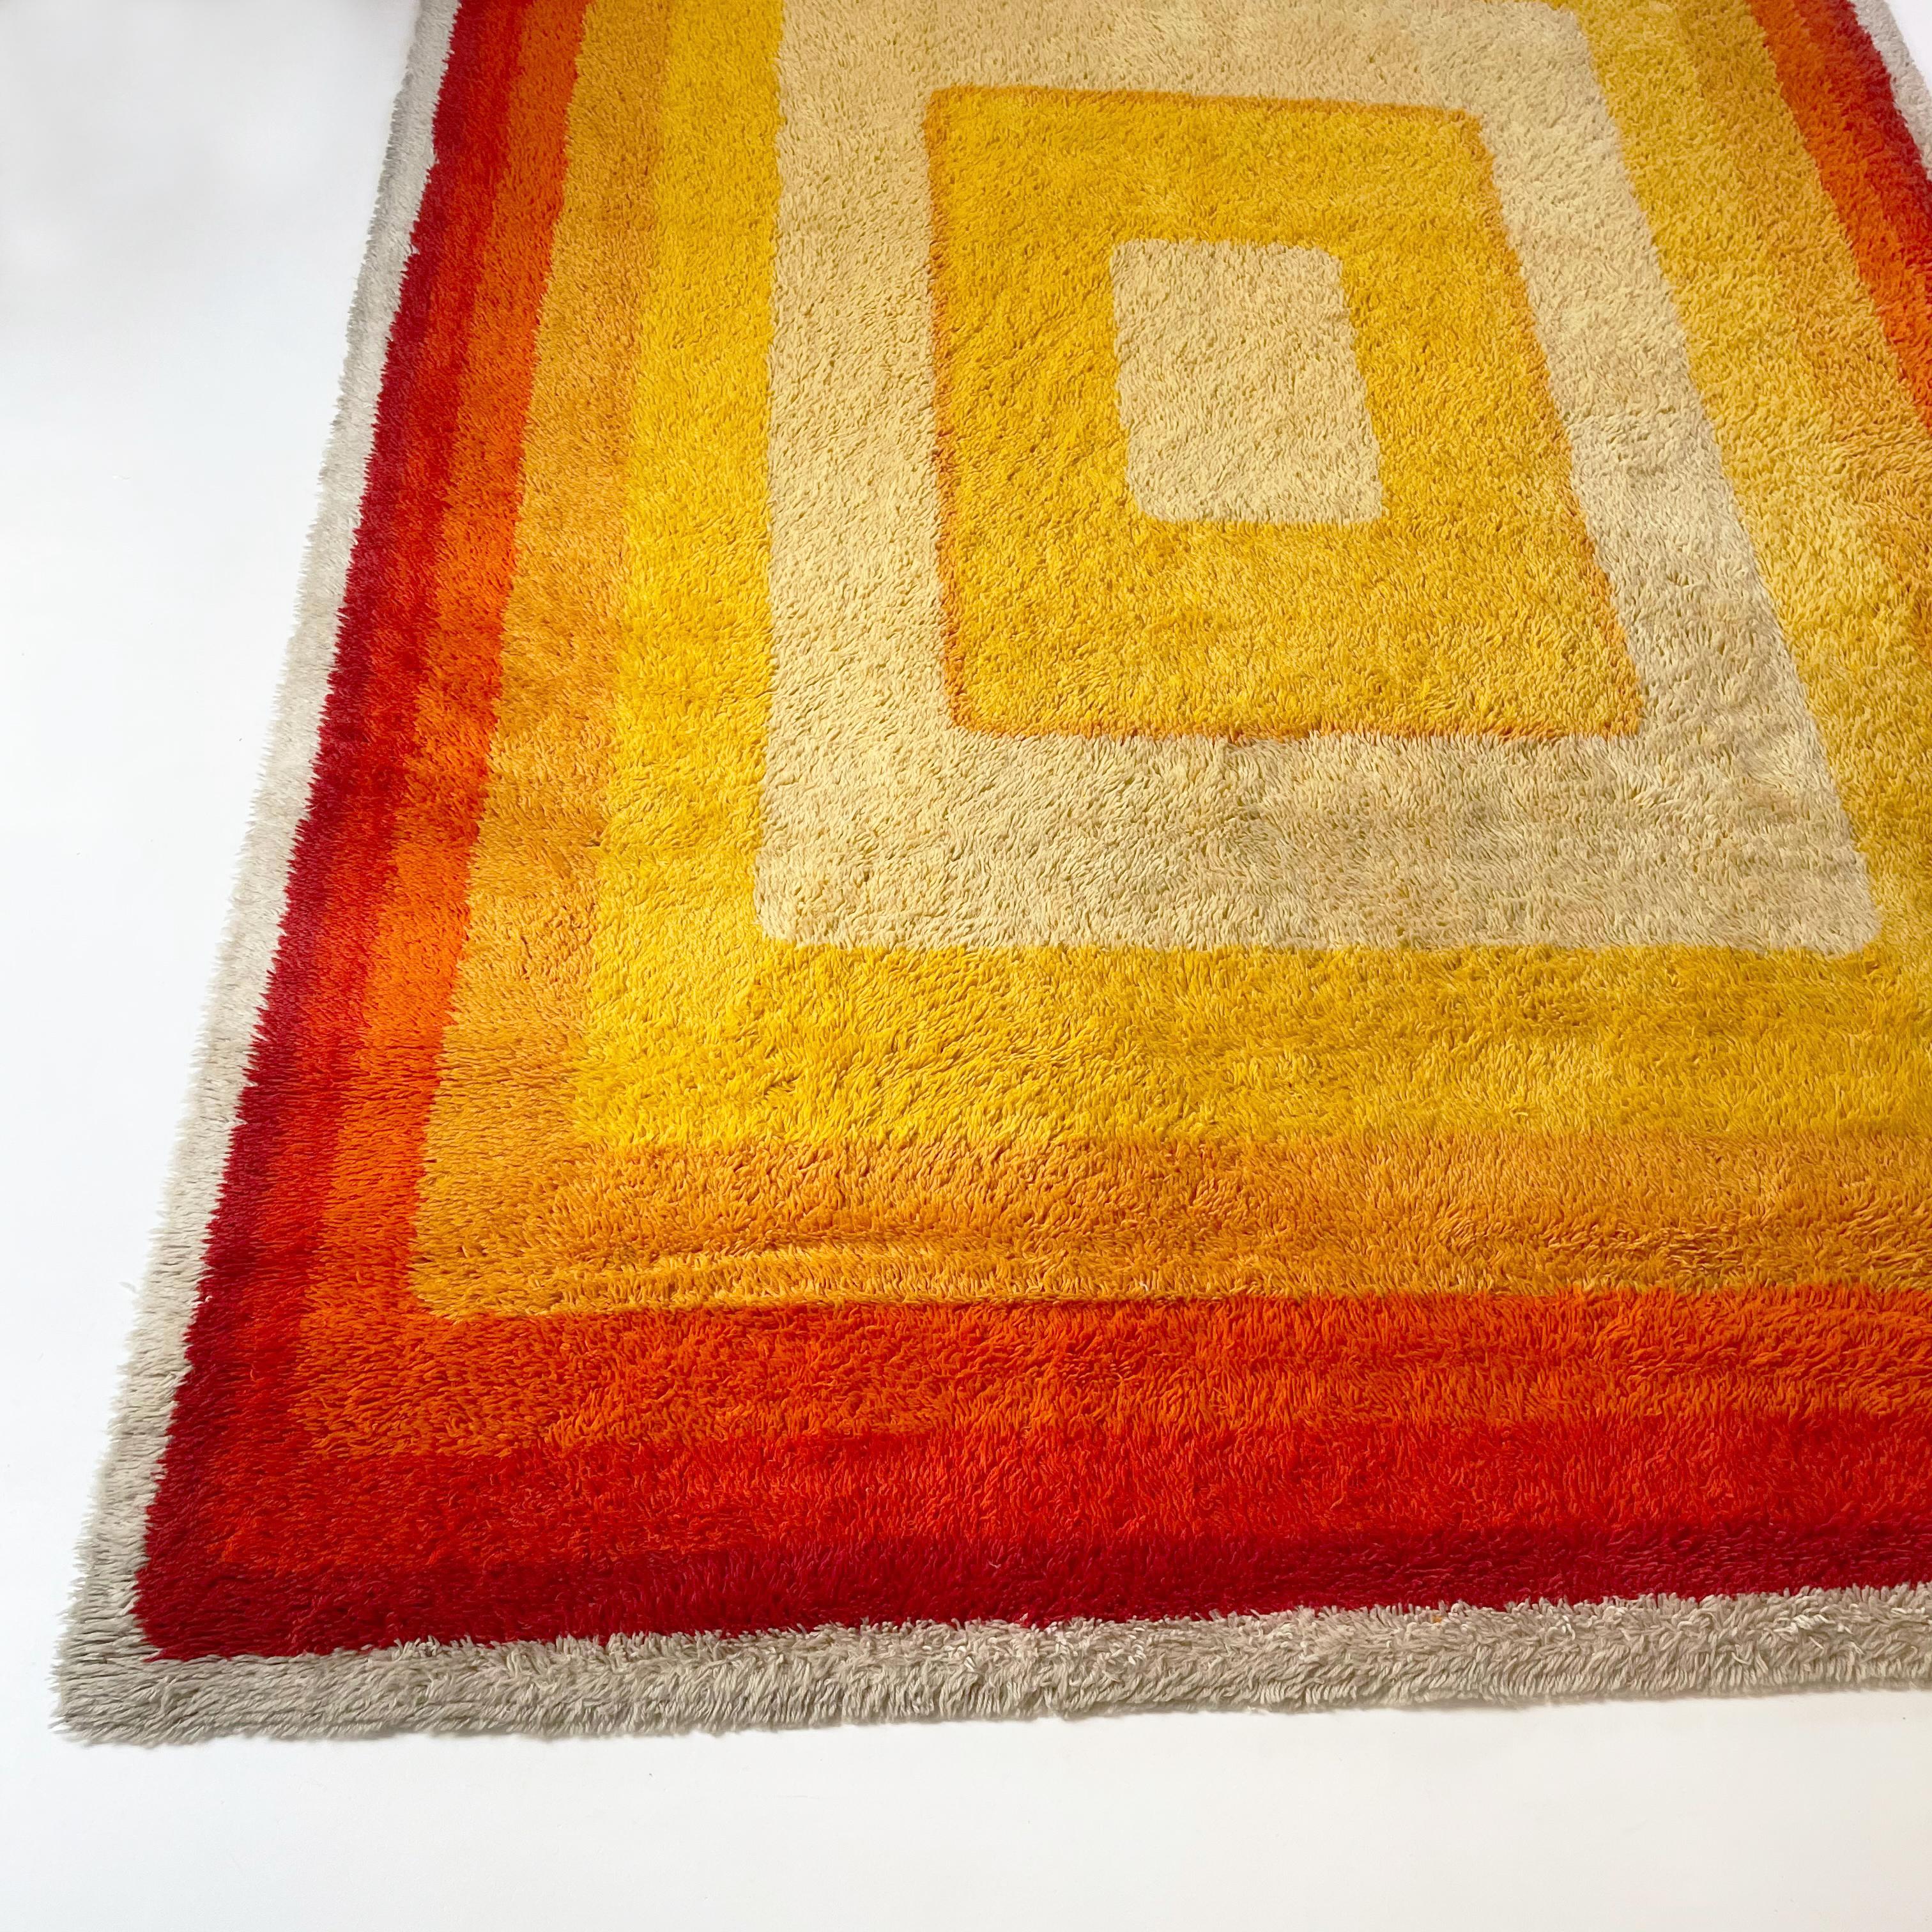 70s style rugs